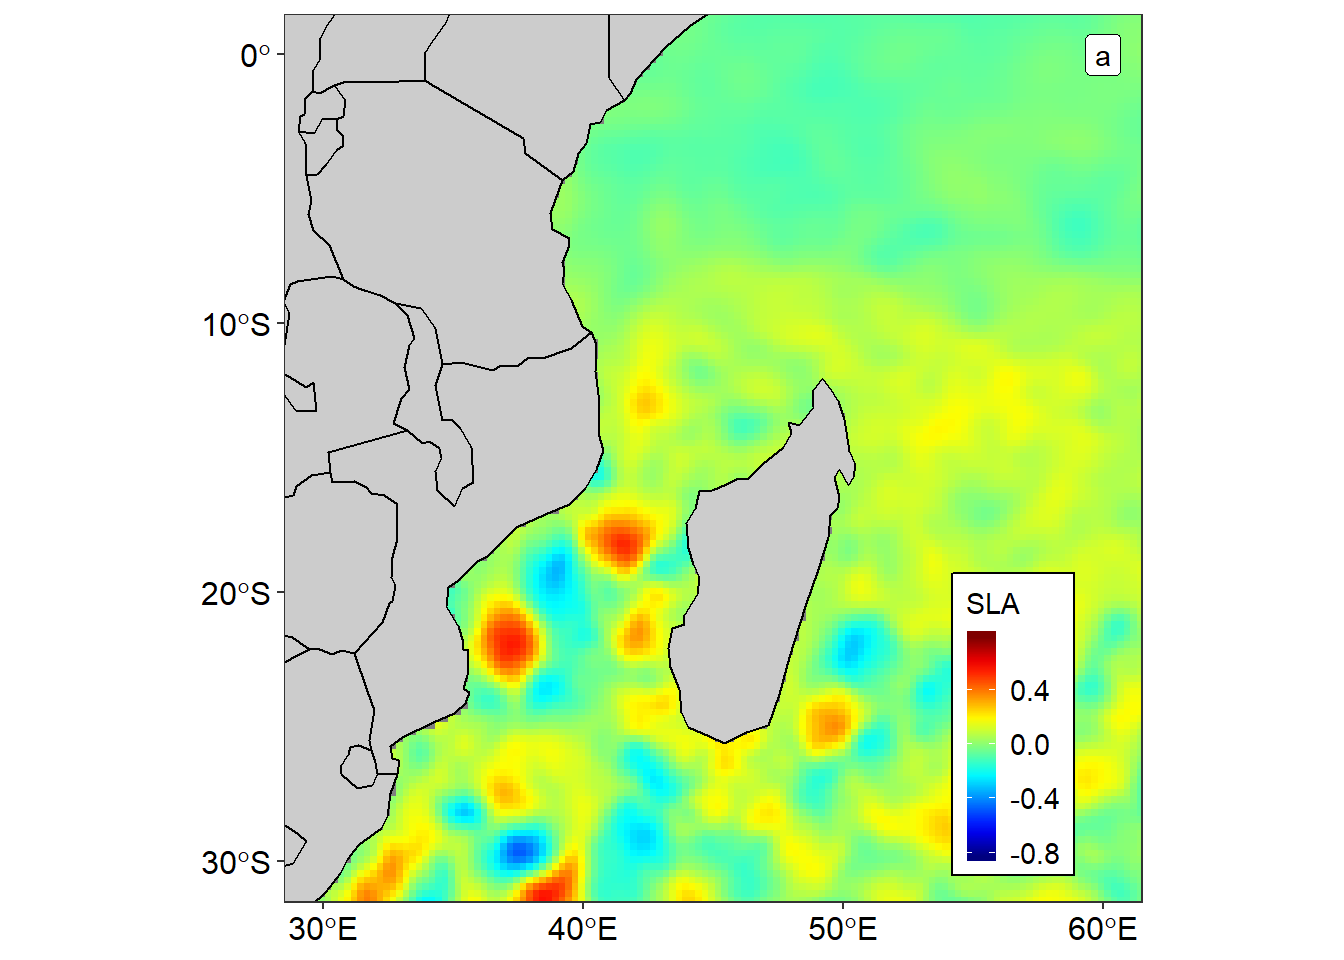 Spatial variation of sea level anomalies in the Indian Ocean